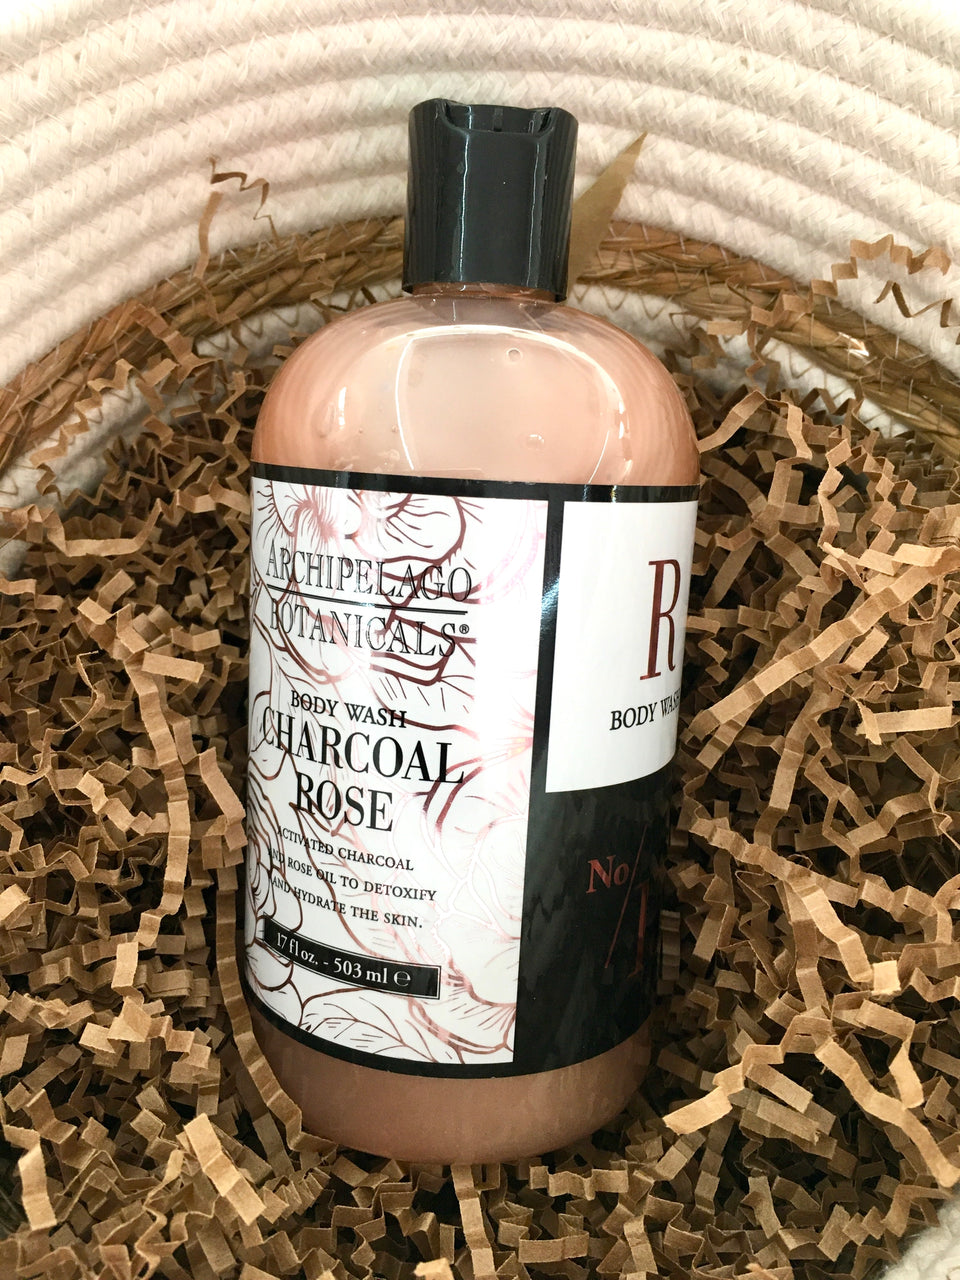 Bottle of Charcoal Rose Body Wash